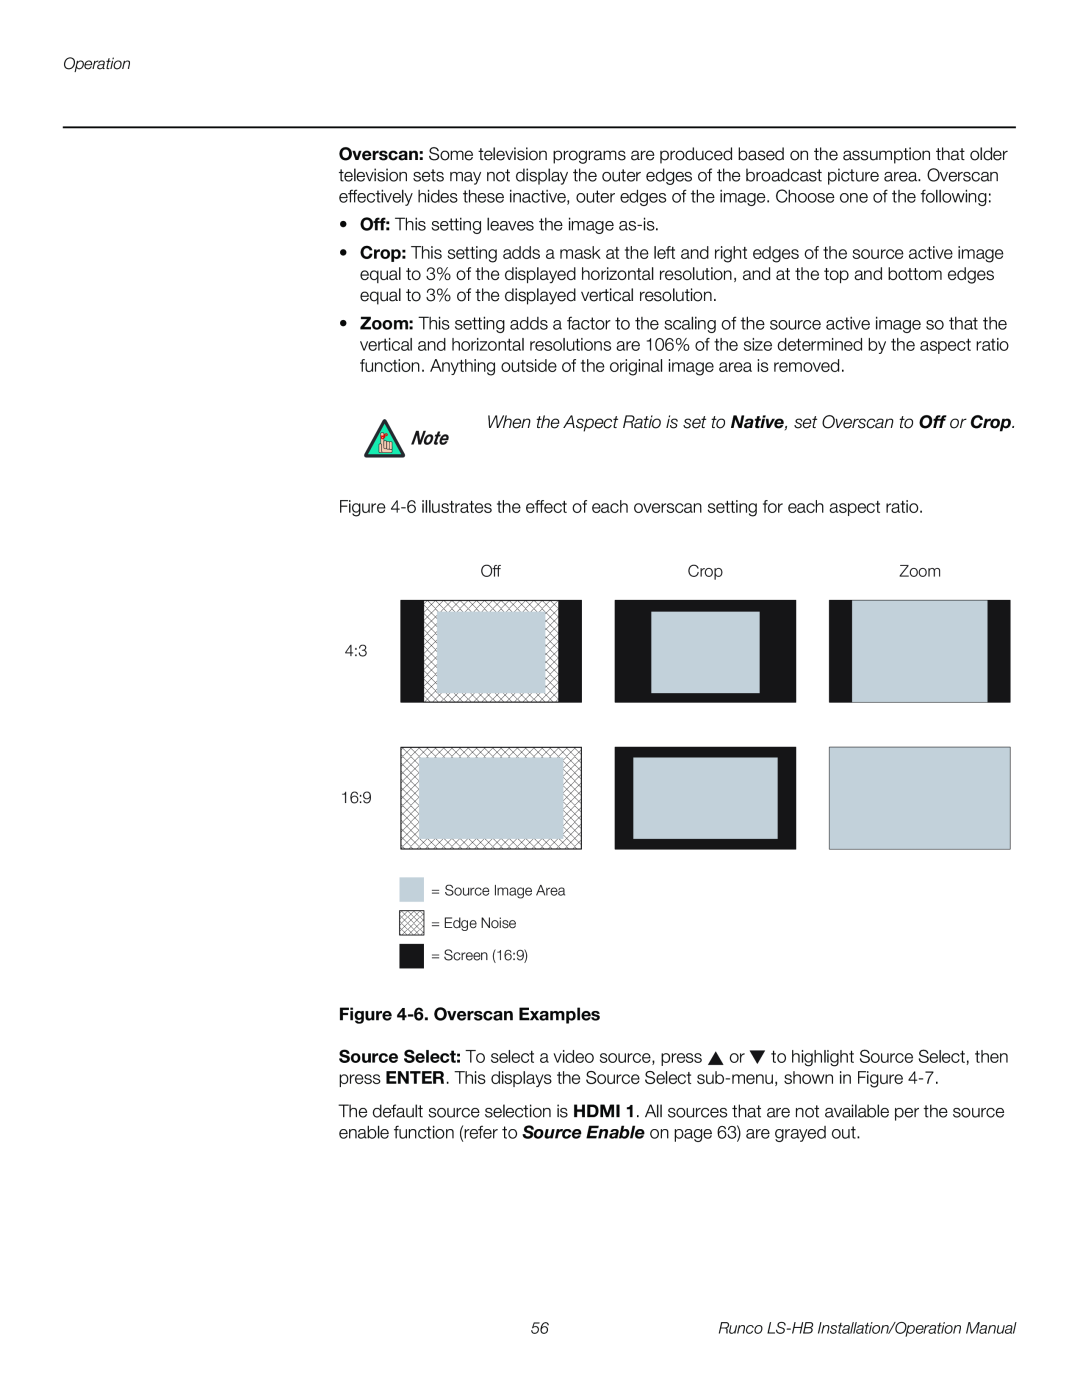 Runco LS-HB operation manual When the Aspect Ratio is set to Native, set Overscan to Off or Crop, 6. Overscan Examples 